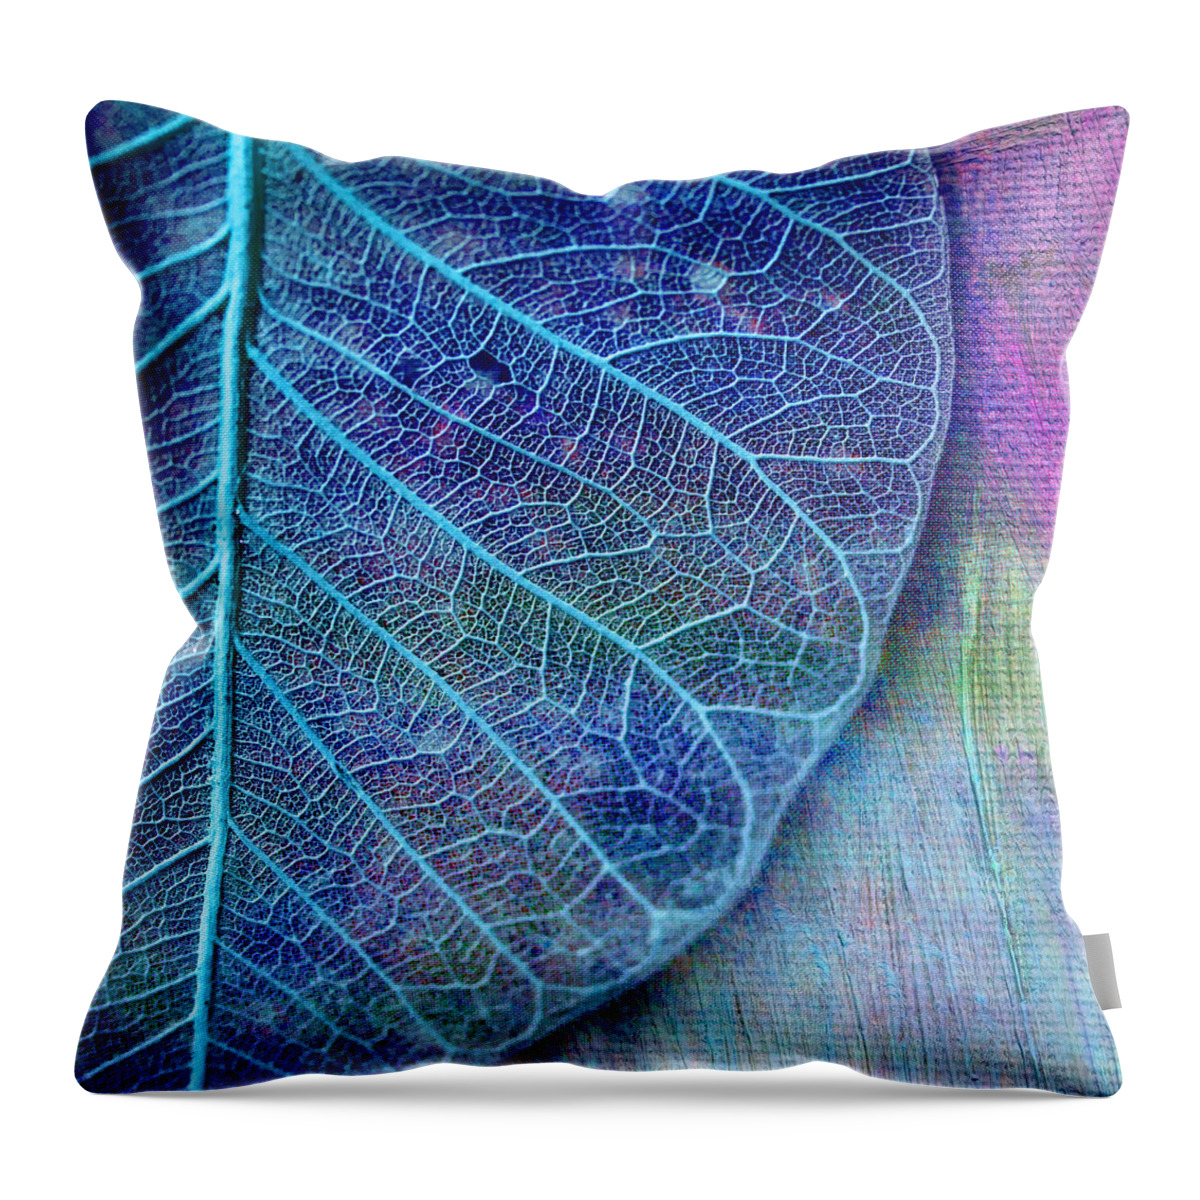 Painted Photo Throw Pillow featuring the painting Blue Skeletal Leaf by Bonnie Bruno